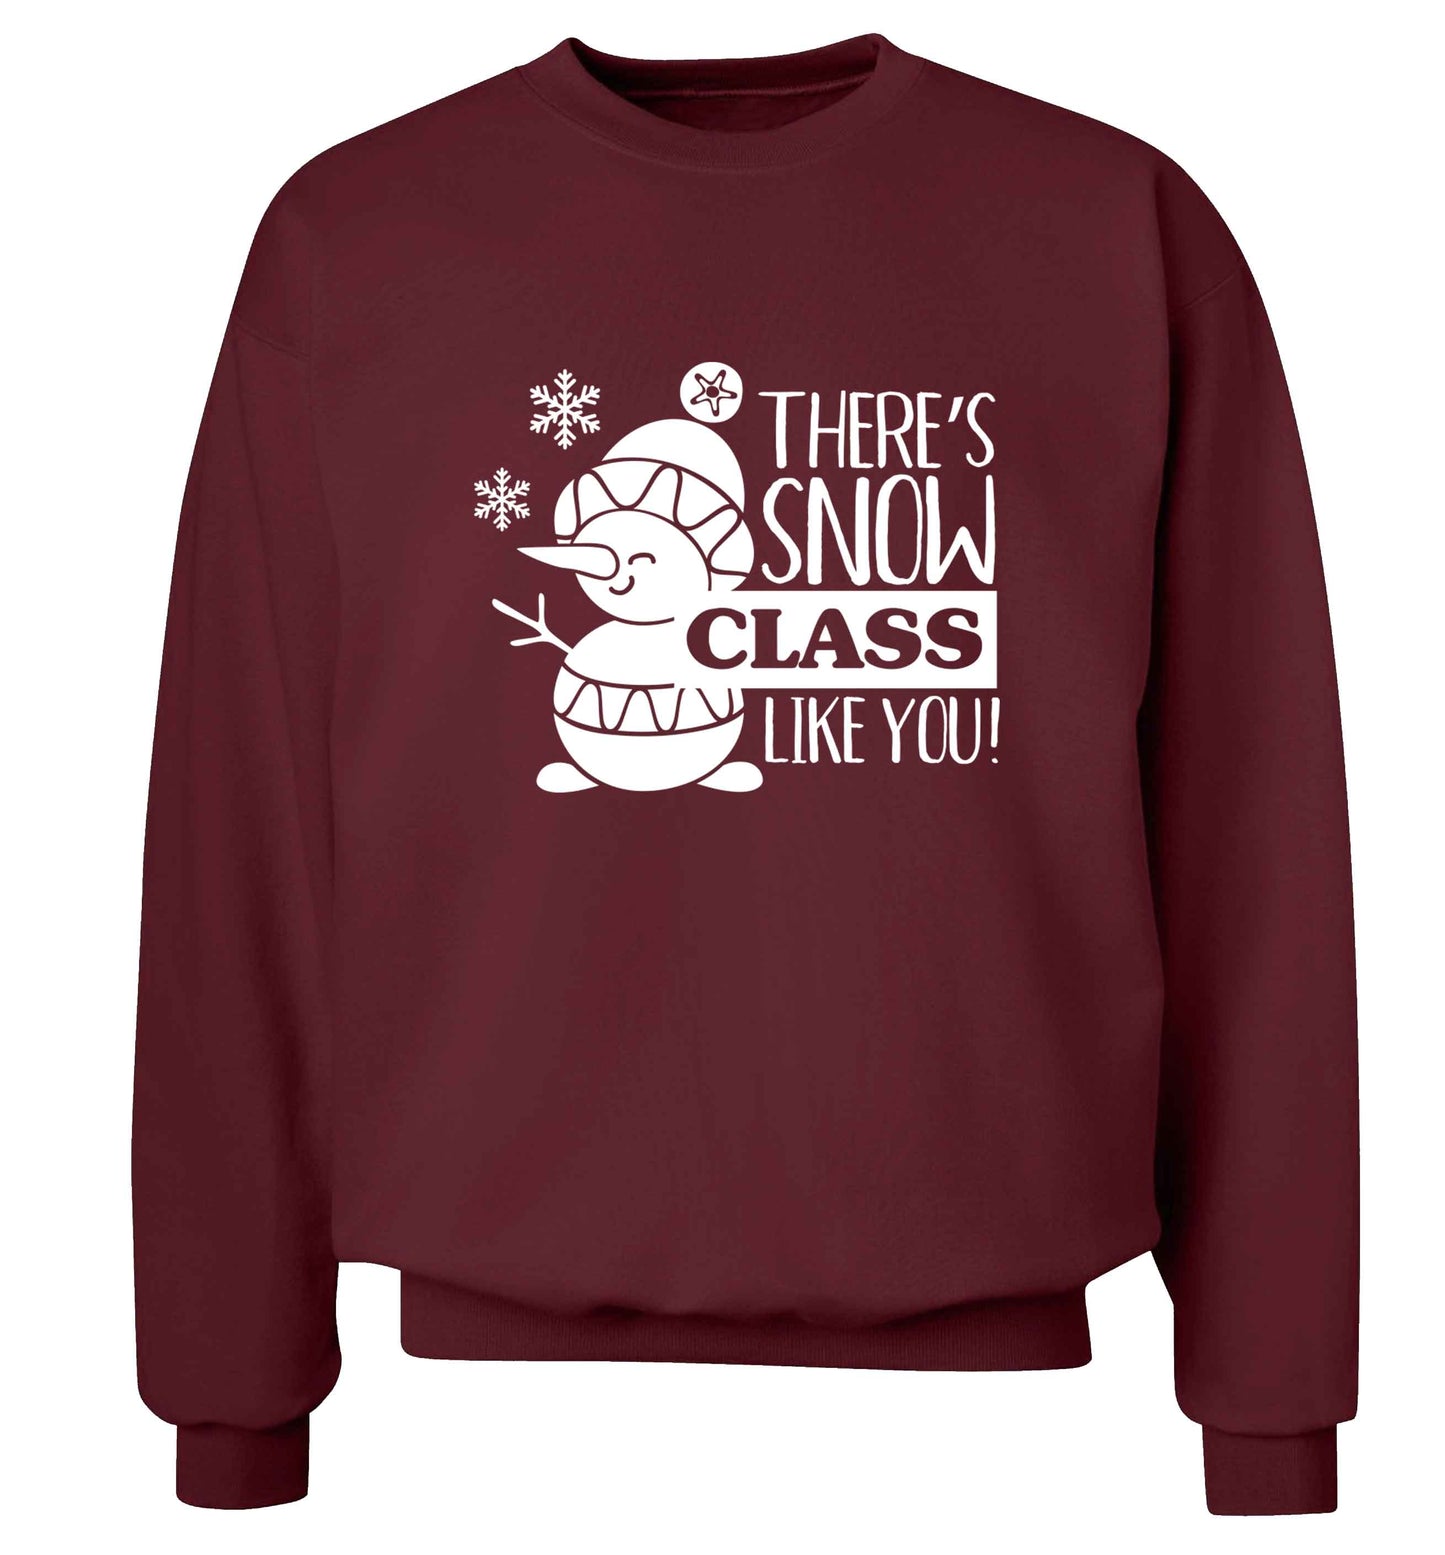 There's snow class like you adult's unisex maroon sweater 2XL